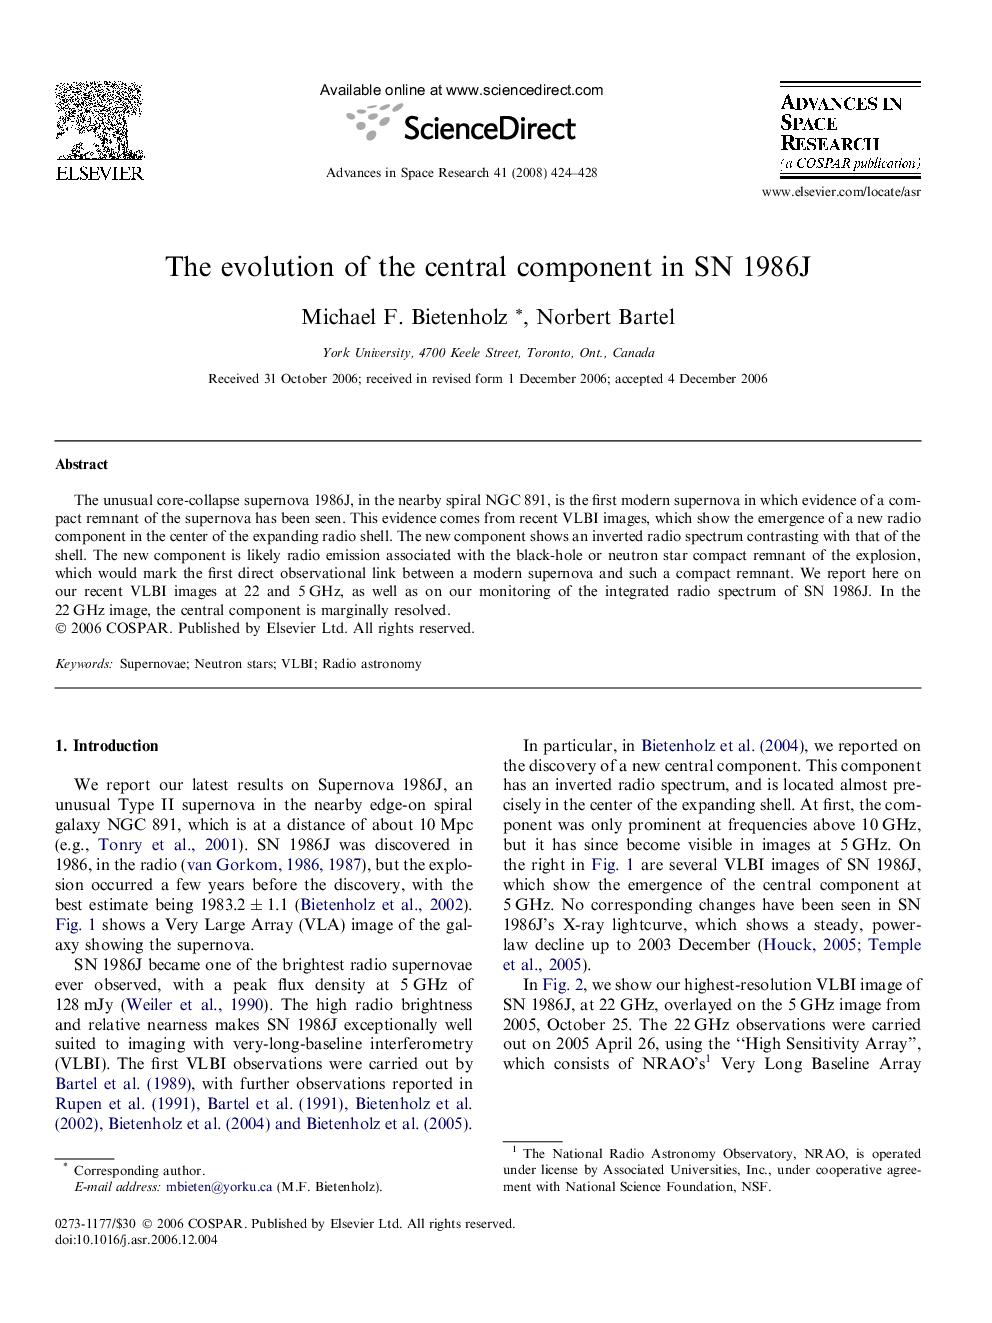 The evolution of the central component in SN 1986J